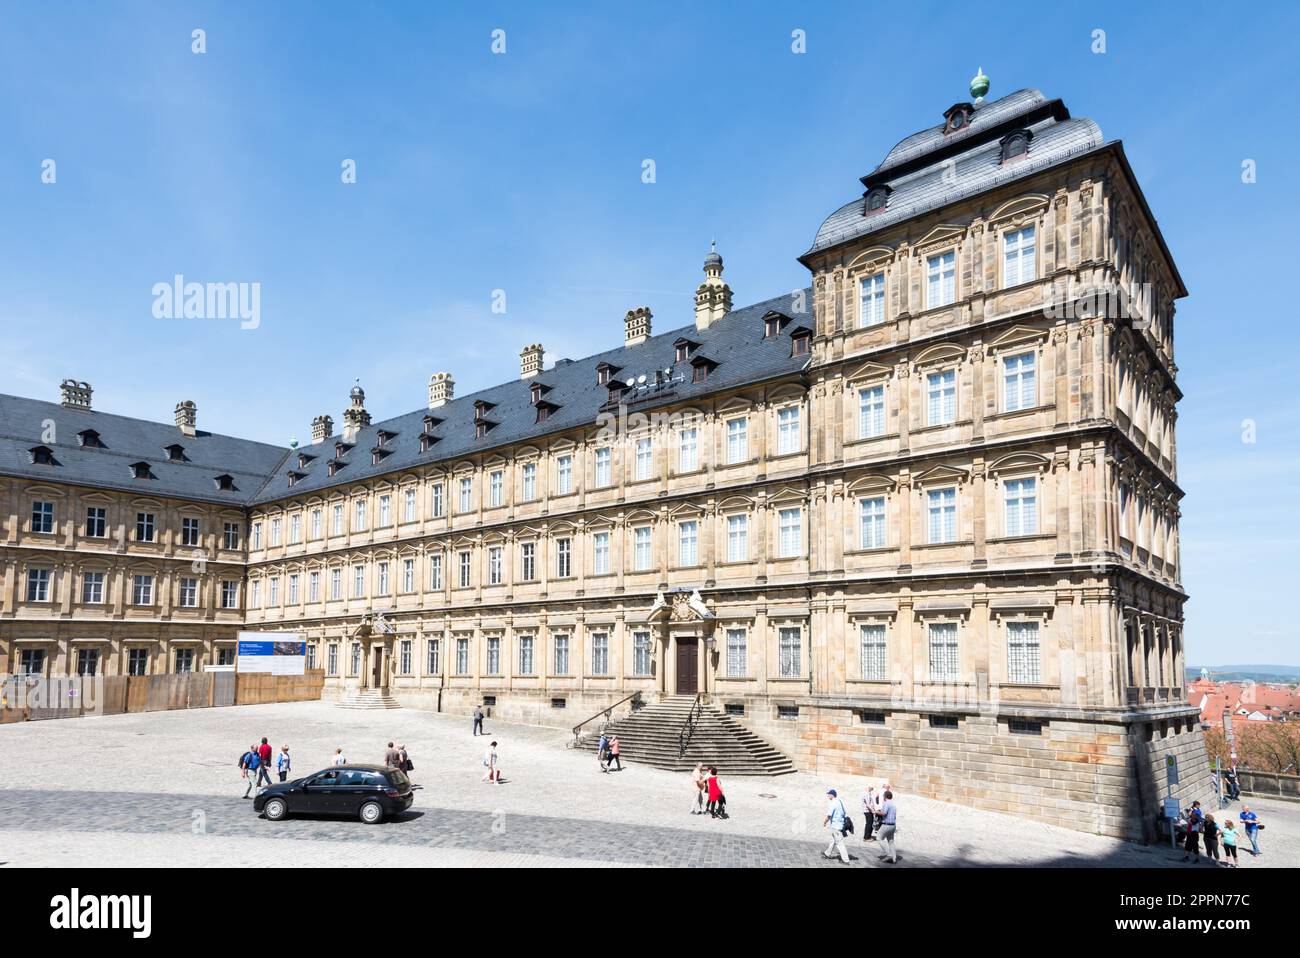 BAMBERG, GERMANY - MAY 6: Tourists at Neue Residenz in Bamberg, Germany on May 6, 2016. The Neue Residenz was the former residence of the bishops of Stock Photo